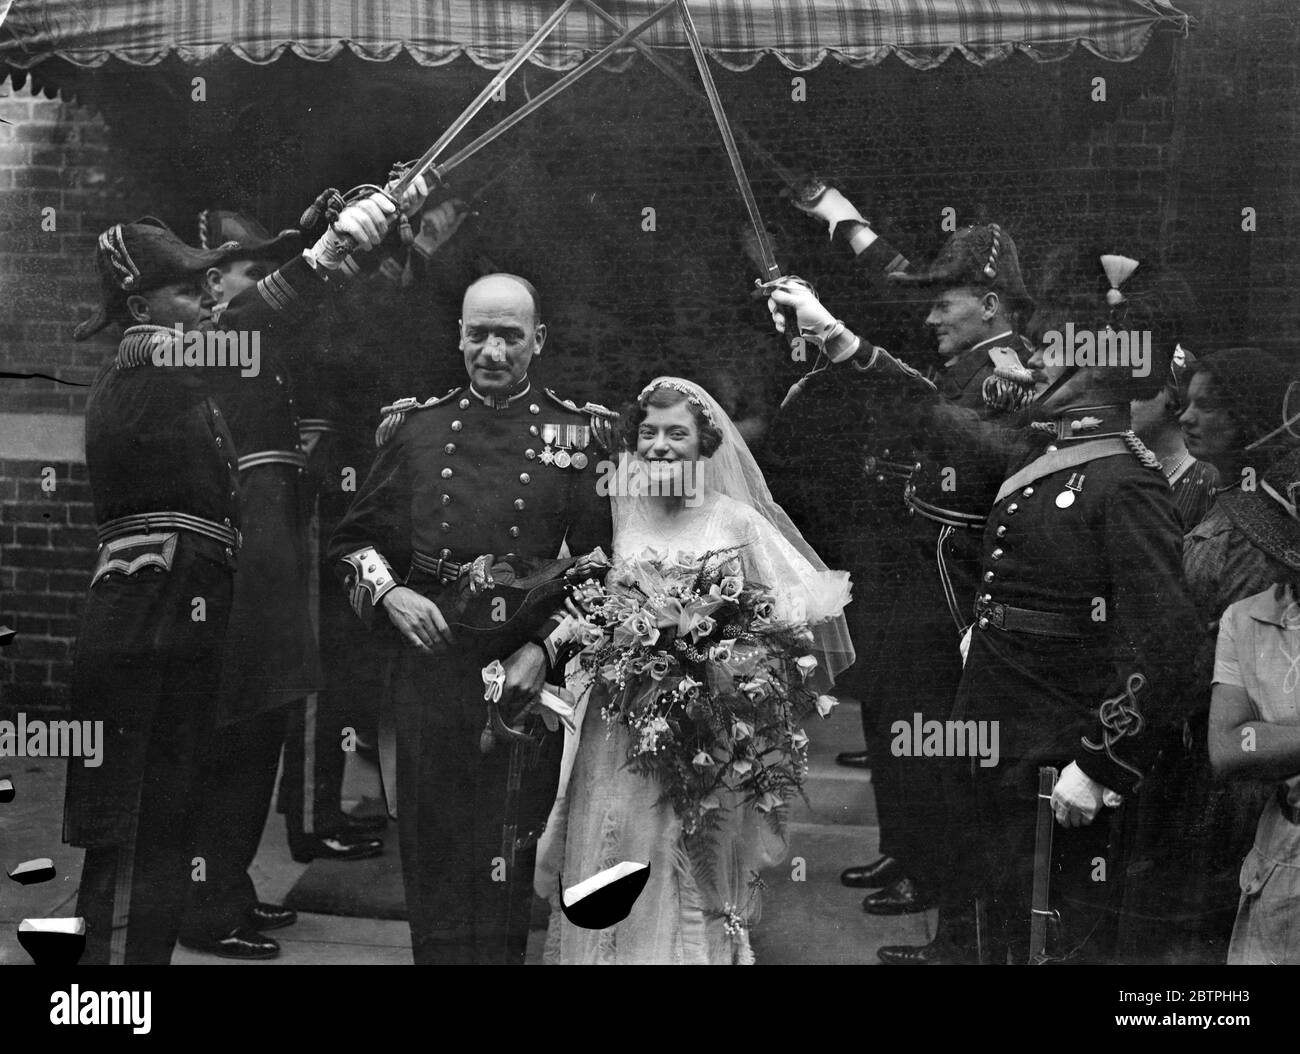 Naval surgeon commander weds . The wedding of Surgeon Commander N A H Barlow , Royal Navy , and Miss Phyllis Ashcraft , took place at Holy Tinity church , Brompton , London . The bride and groom leaving the church through the naval guard of honour after the ceremony . 10 August 1932 Stock Photo